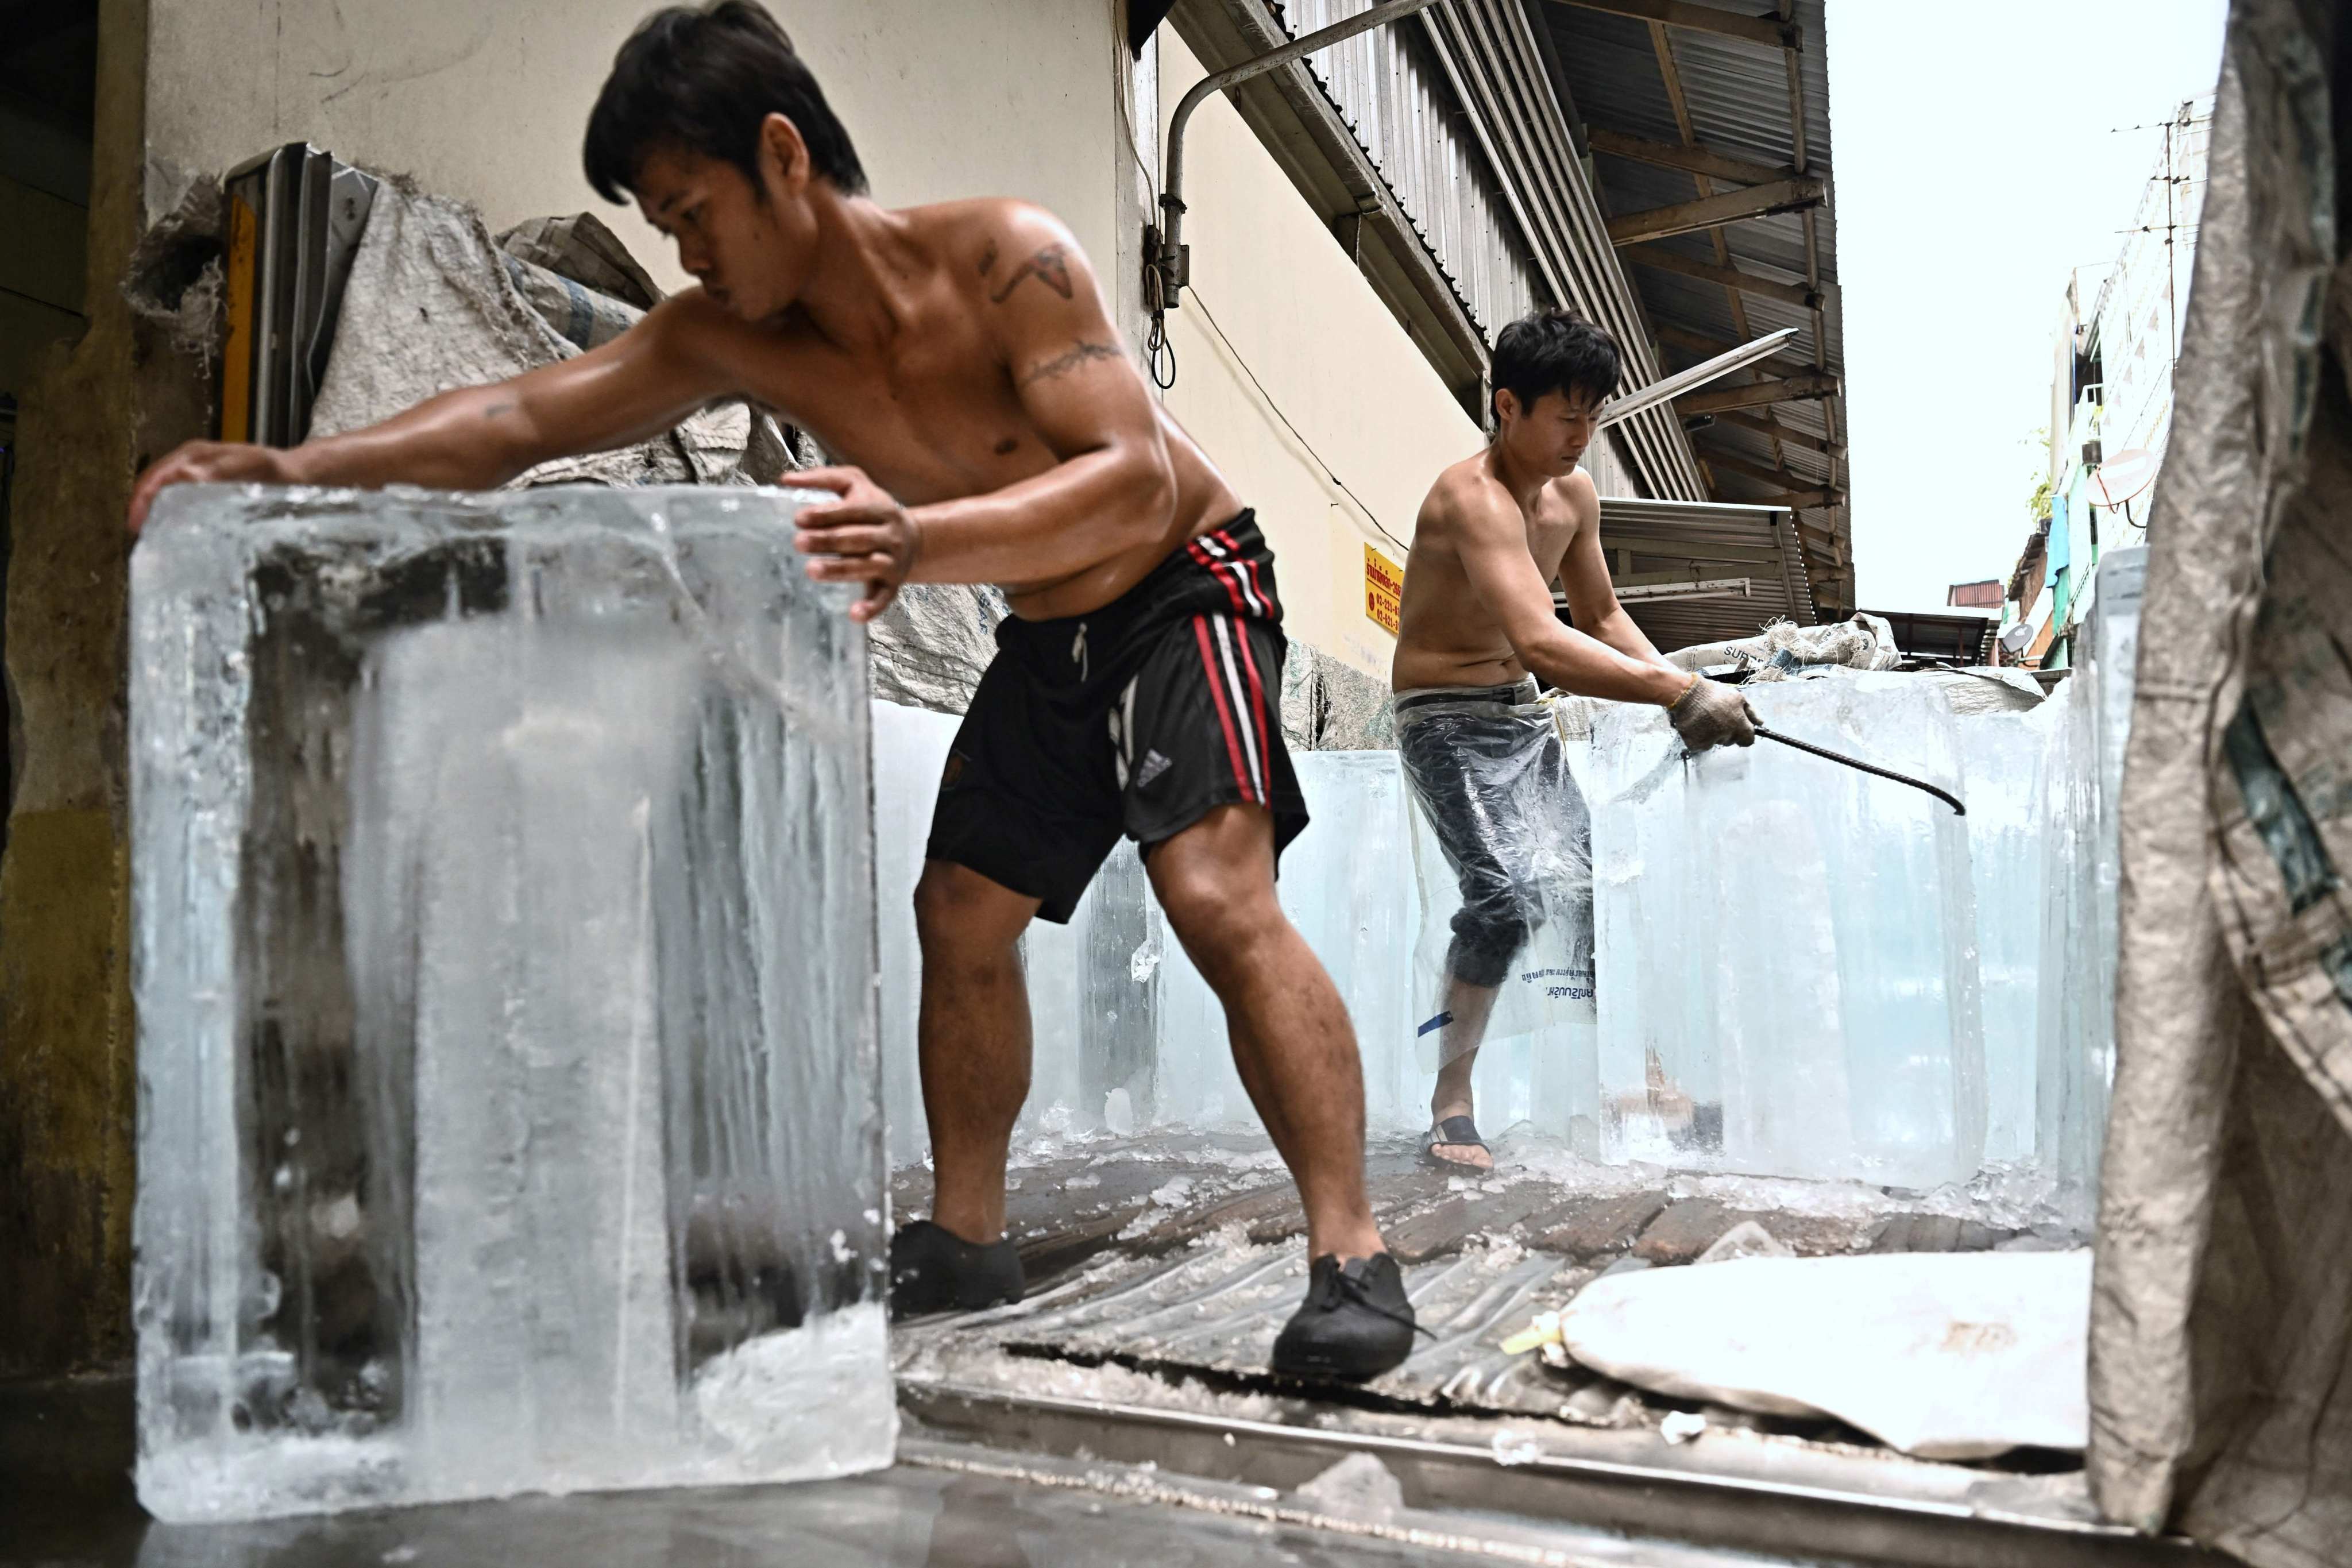 Workers move blocks of ice into a storage unit at a market during a heatwave in Bangkok on April 25. Scientists say global warming is exacerbating adverse weather, with many countries experiencing deadly heatwaves and temperatures hitting records across Southeast and South Asia in recent weeks. Photo: AFP